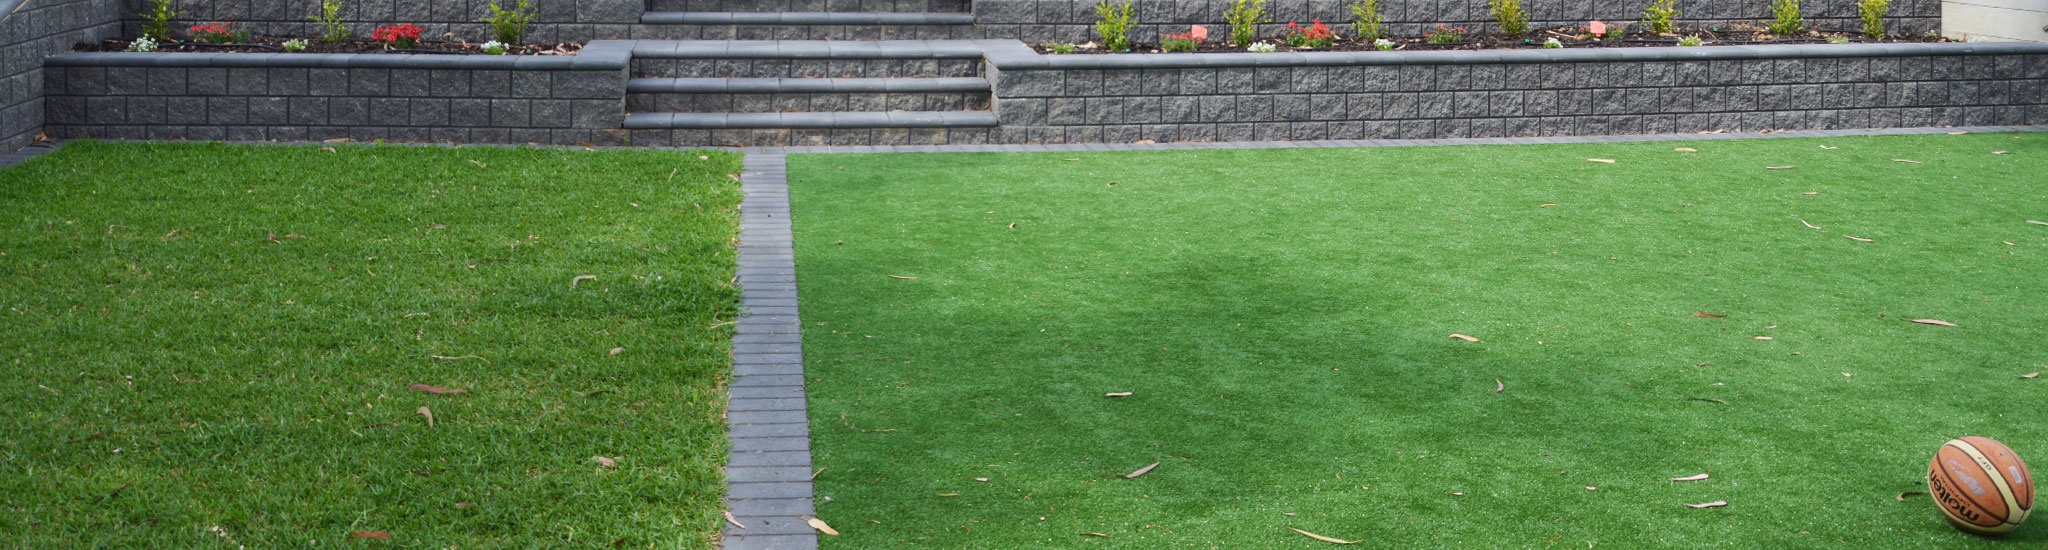 Instant Lawn | Roll Out Lawn | Artificial Grass